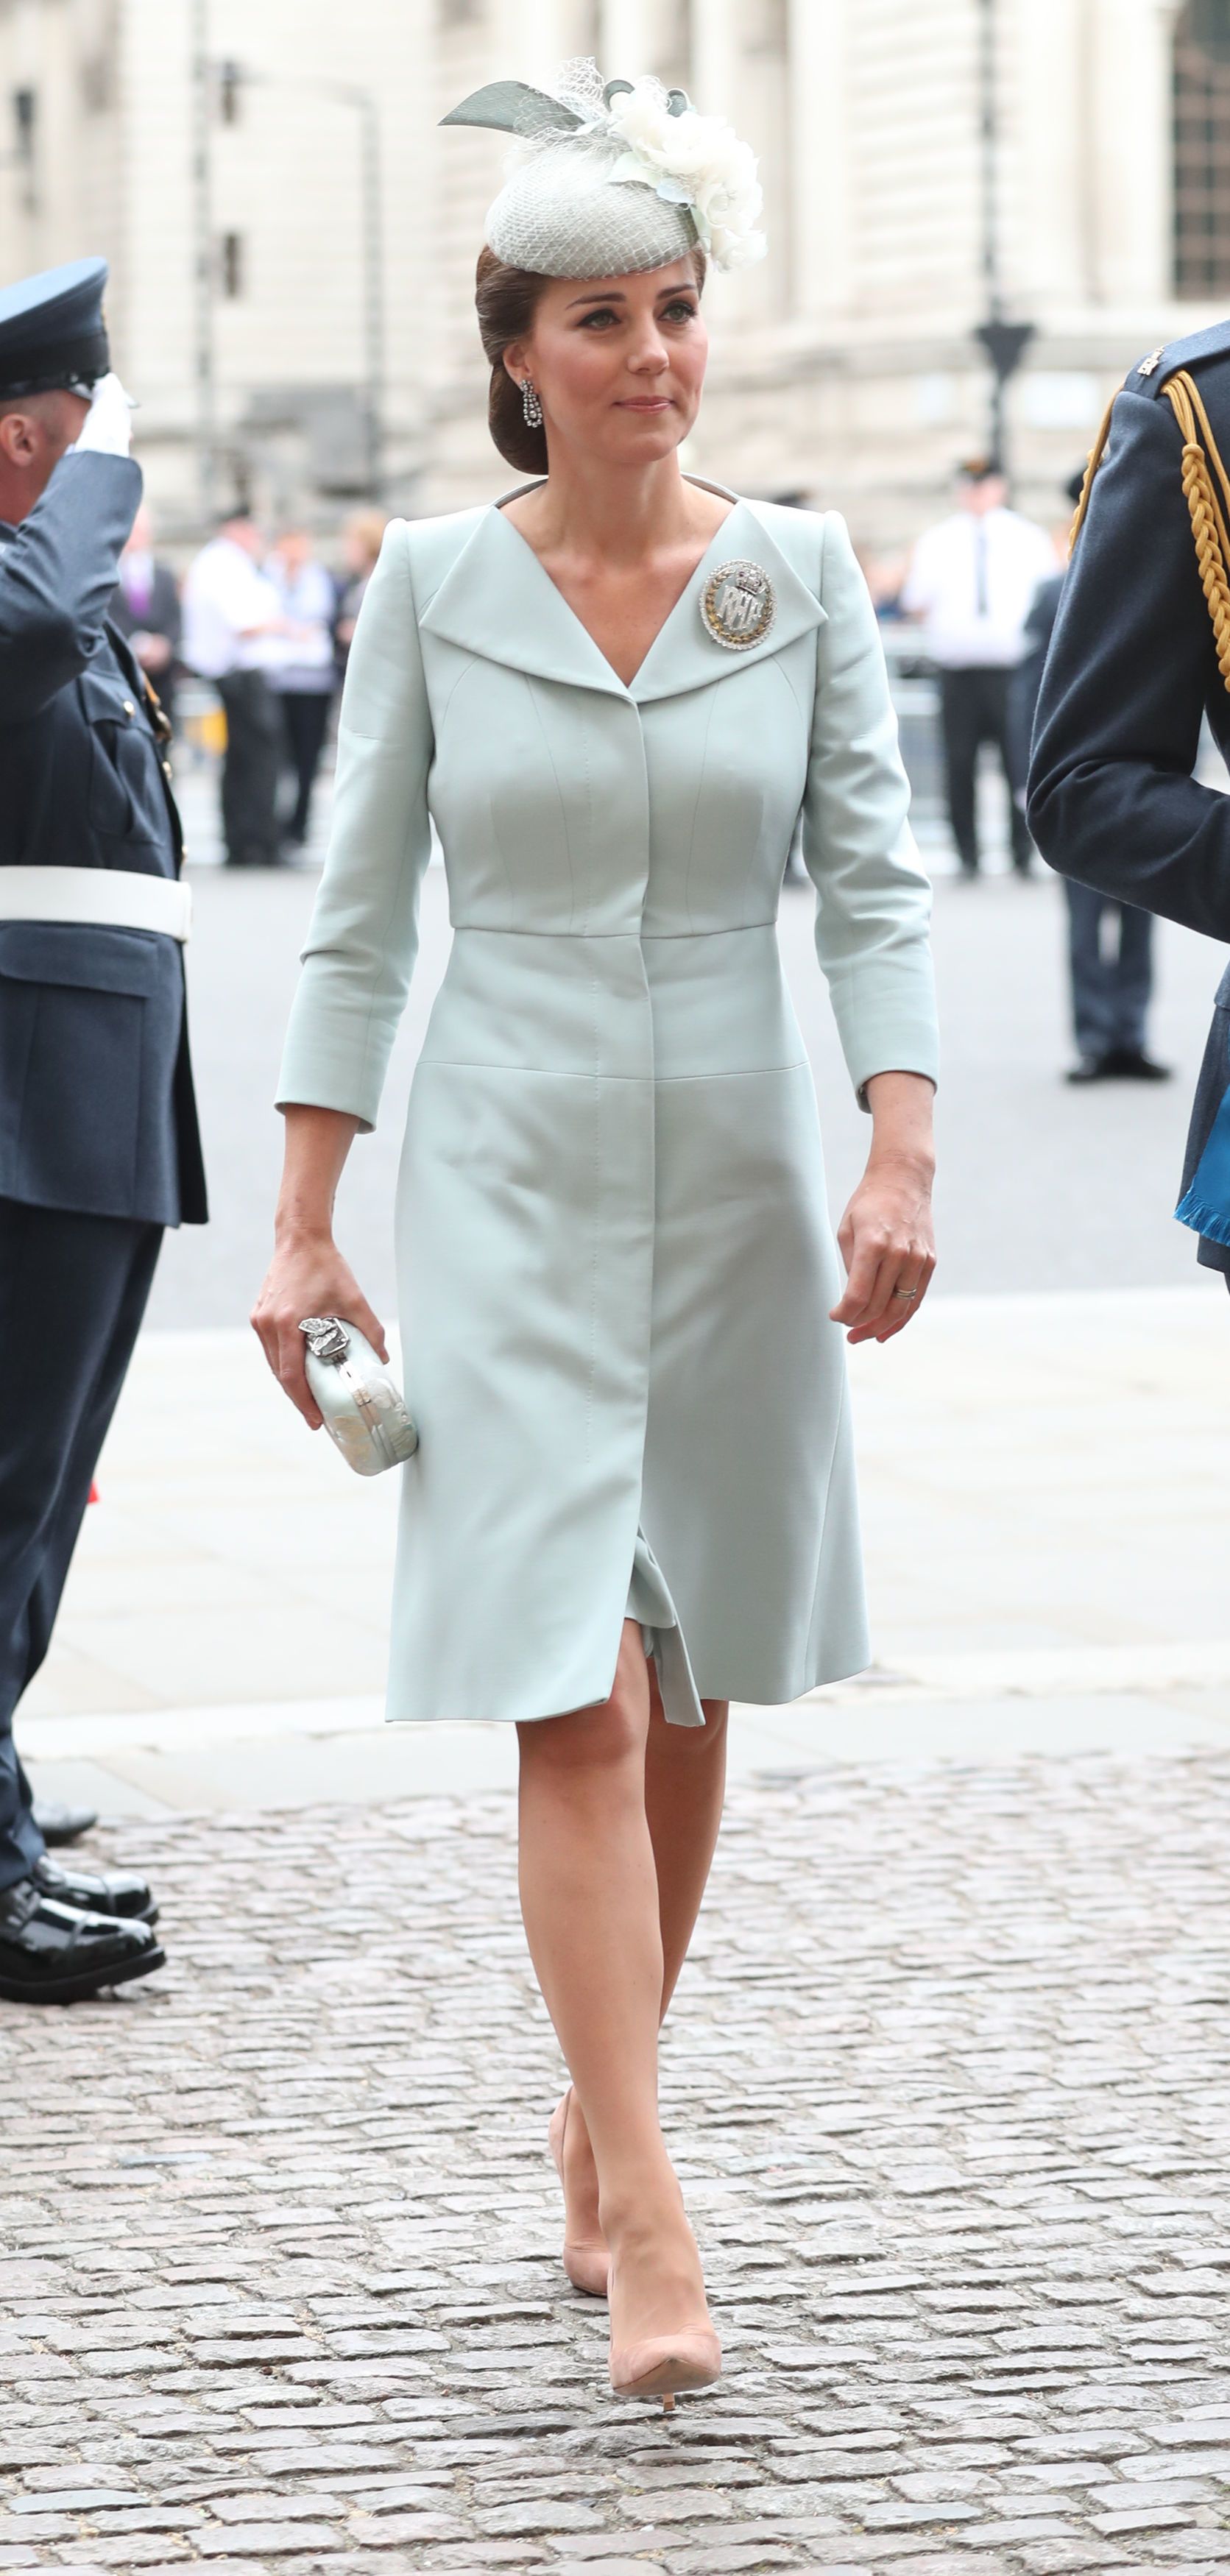 Kate Middleton in Alexander McQueen outfits • dresses, coats & bags